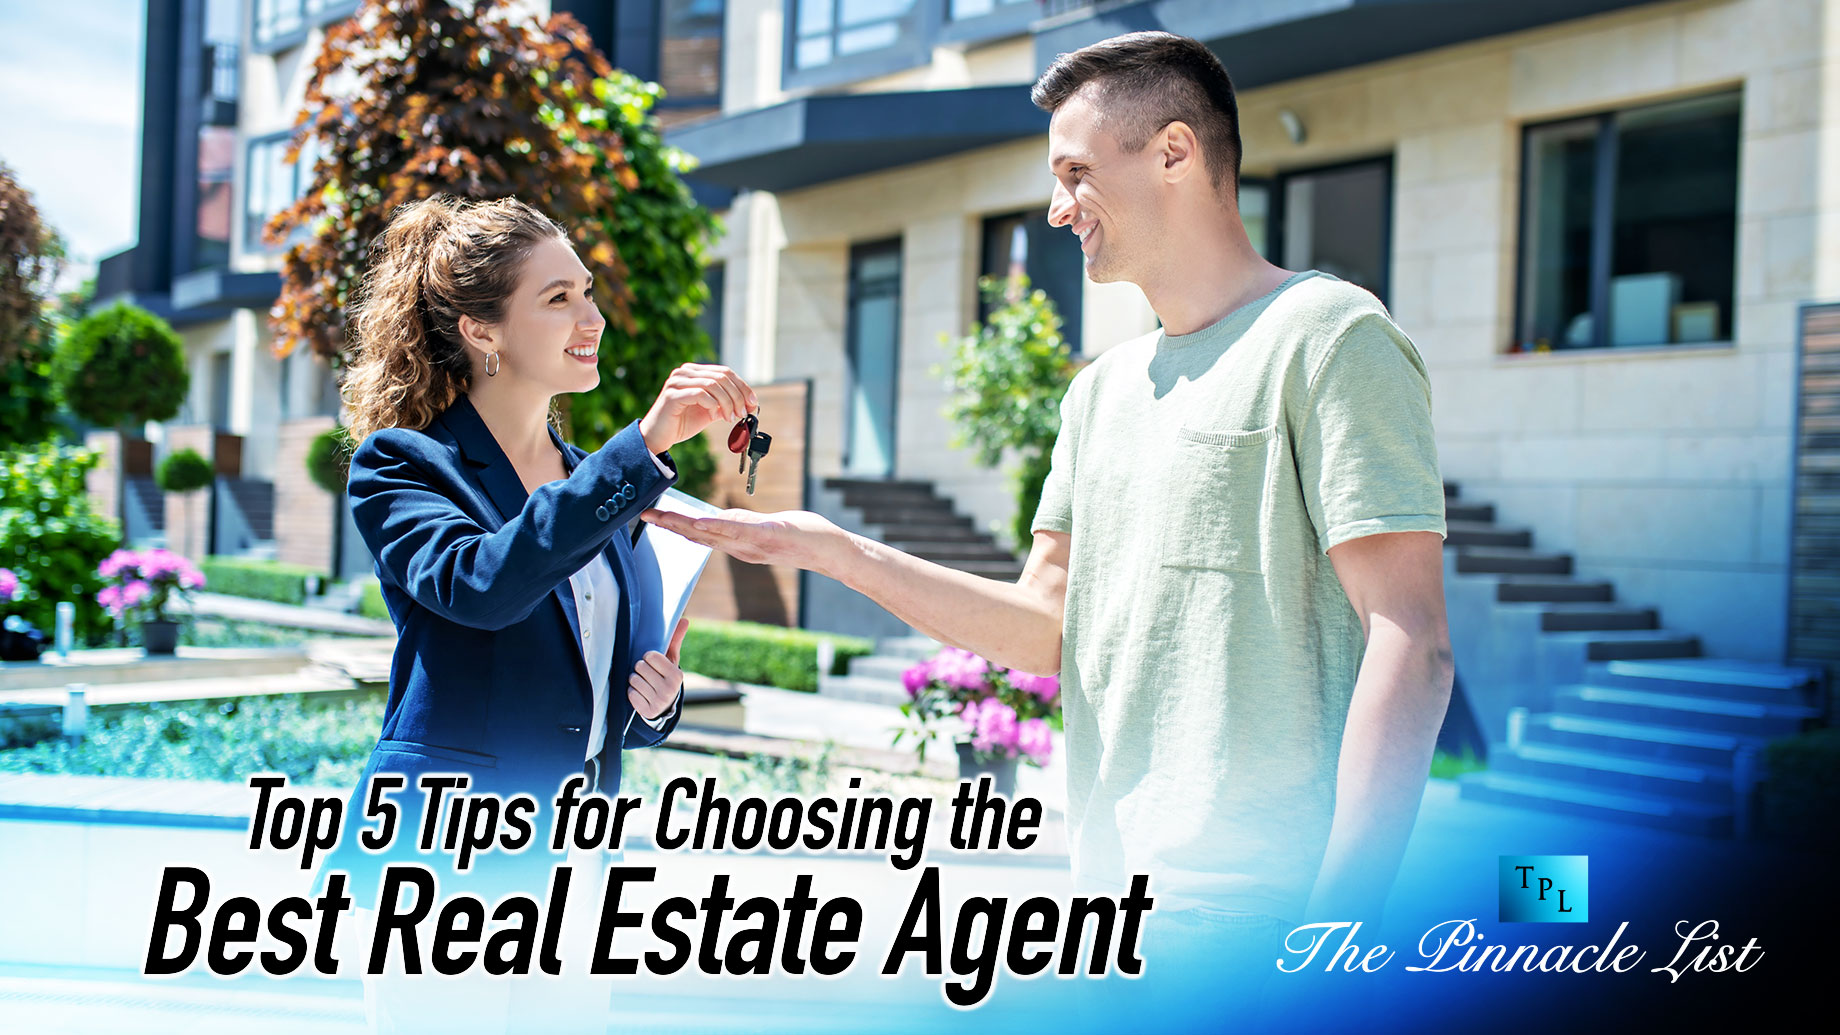 Top 5 Tips for Choosing the Best Real Estate Agent